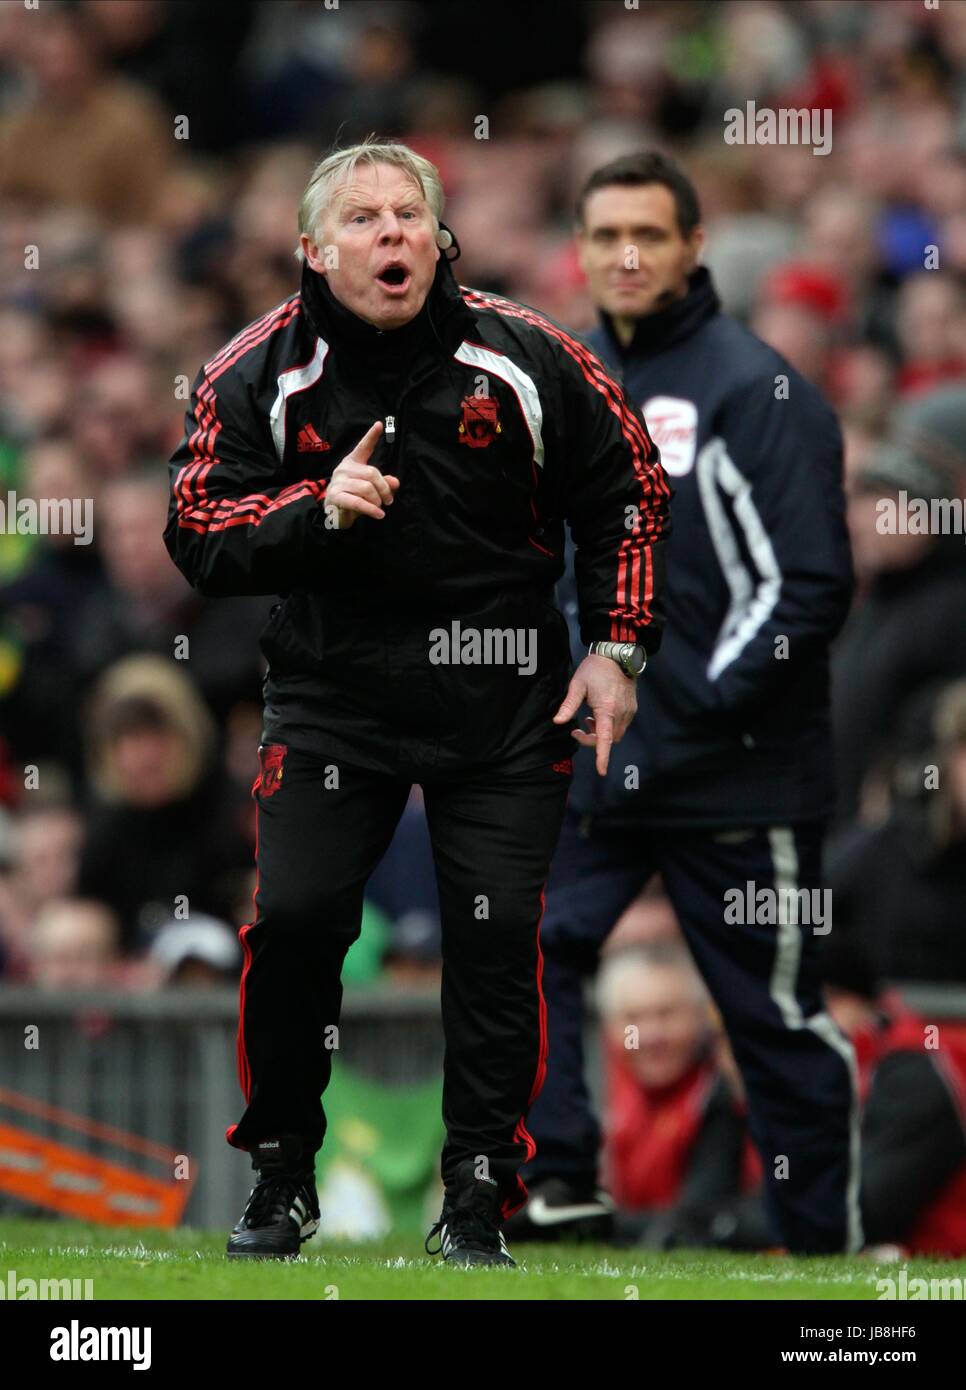 SAMMY LEE LIVERPOOL FC COACH LIVERPOOL FC COACH OLD TRAFFORD MANCHESTER  ENGLAND 09 January 2011 Stock Photo - Alamy